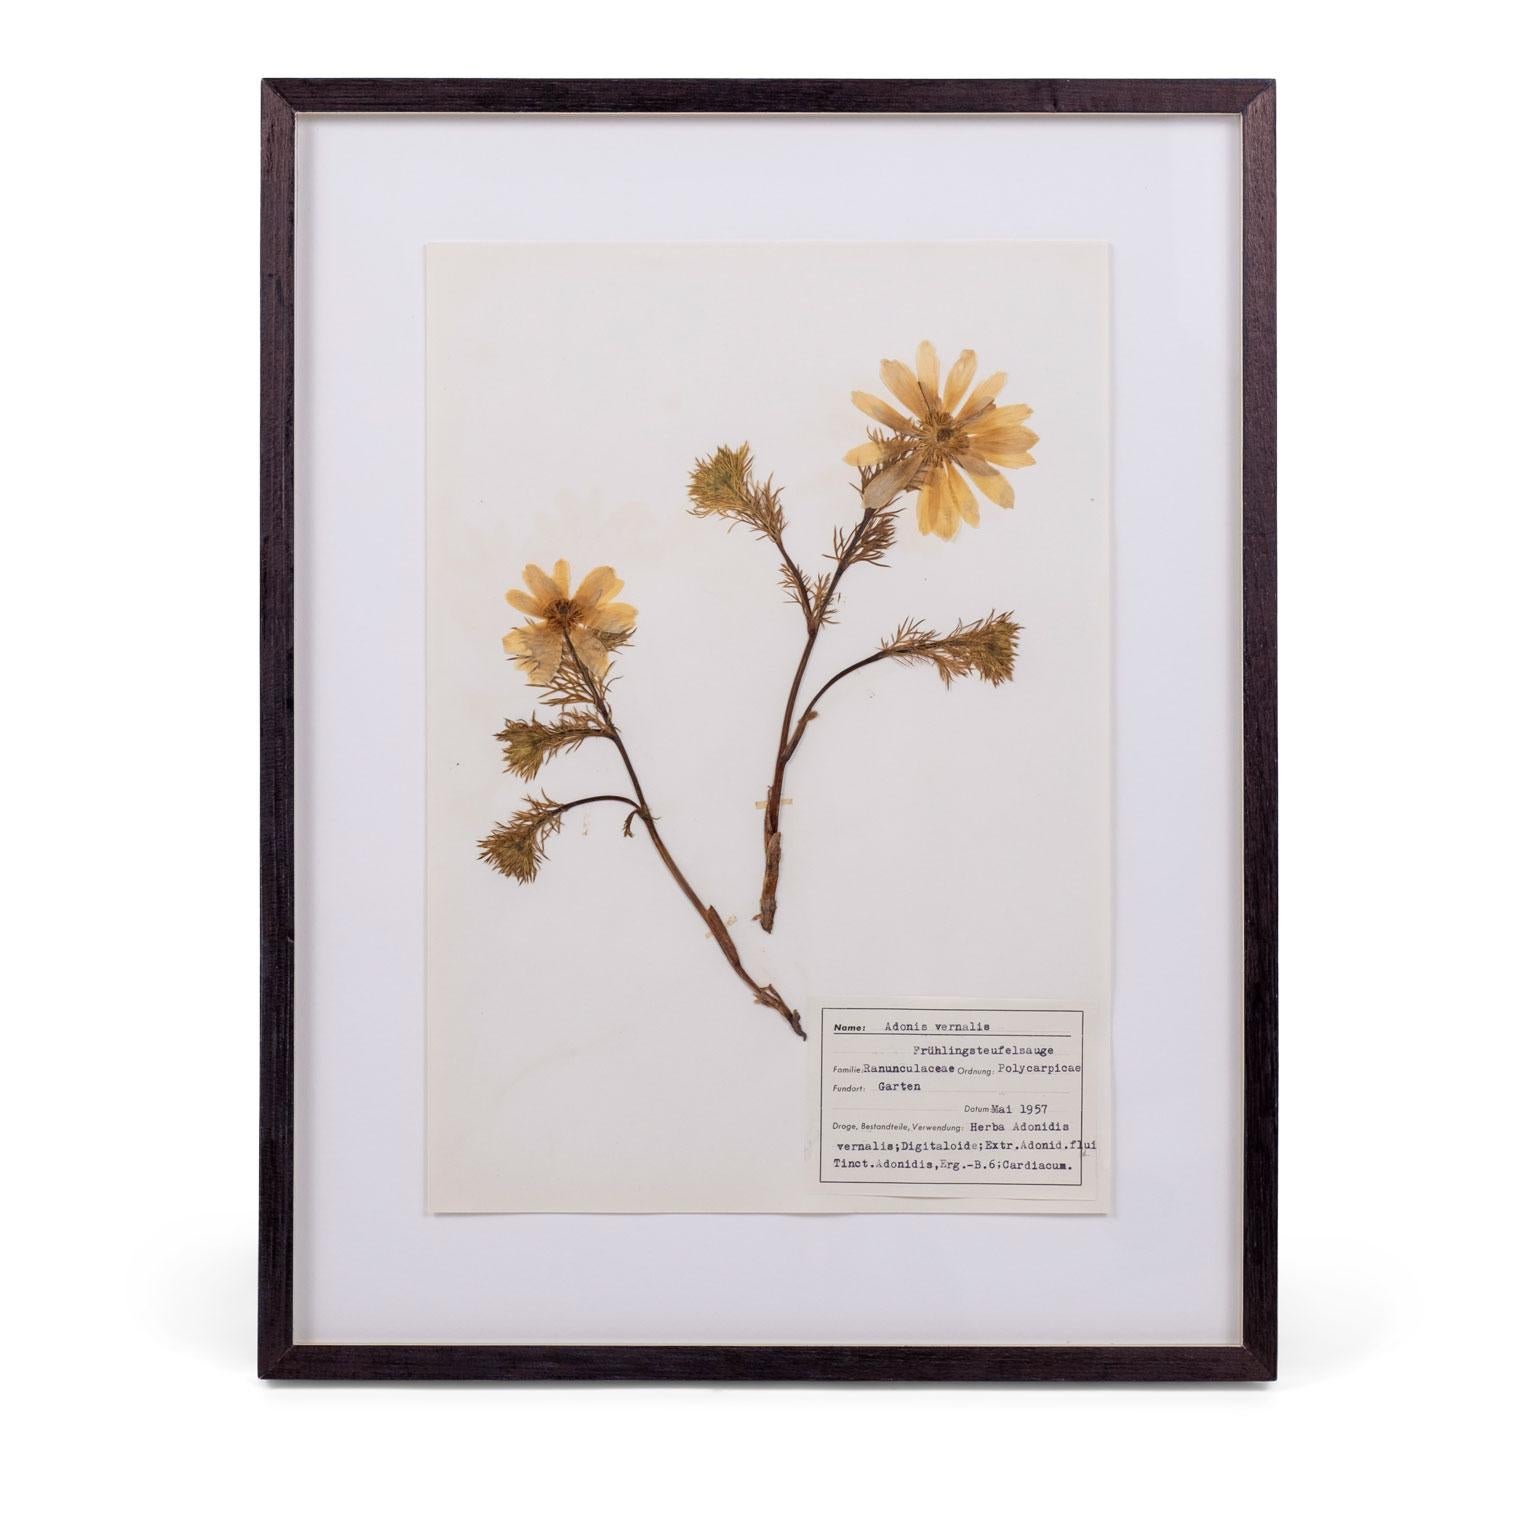 Original German midcentury Herbaria. Each float mounted herbarium measures: 13.75 inches x 9.5 inches unframed. Framed in custom black waxed museum basswood. All materials acid-free archival quality except glass. Framed herbariums are sold